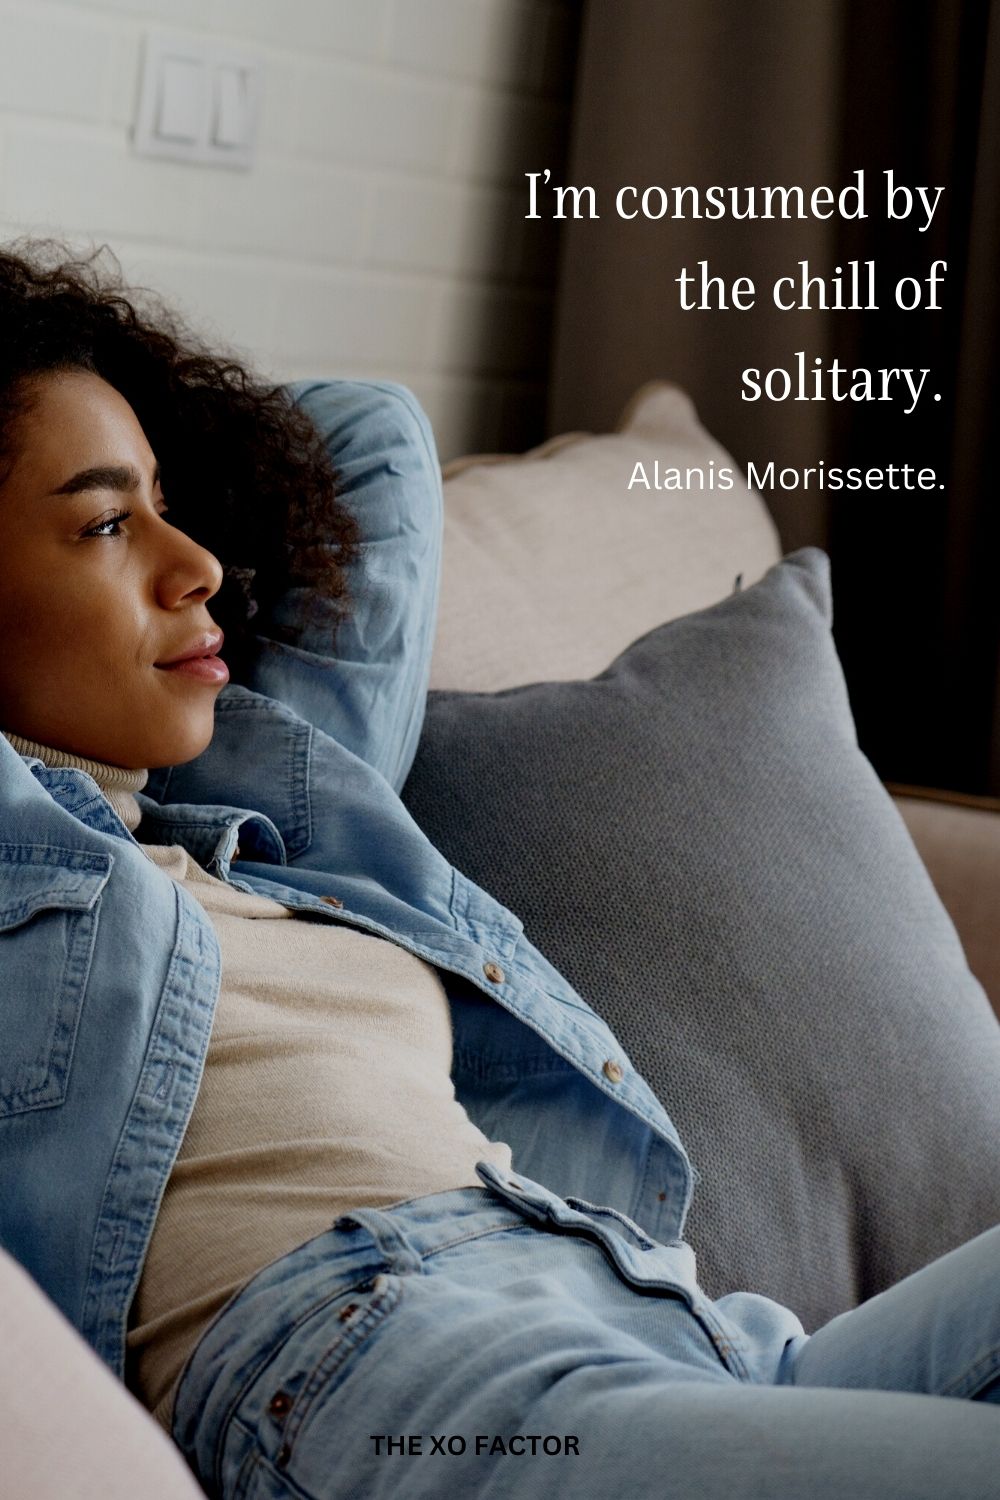 I’m consumed by the chill of solitary.
Alanis Morissette.